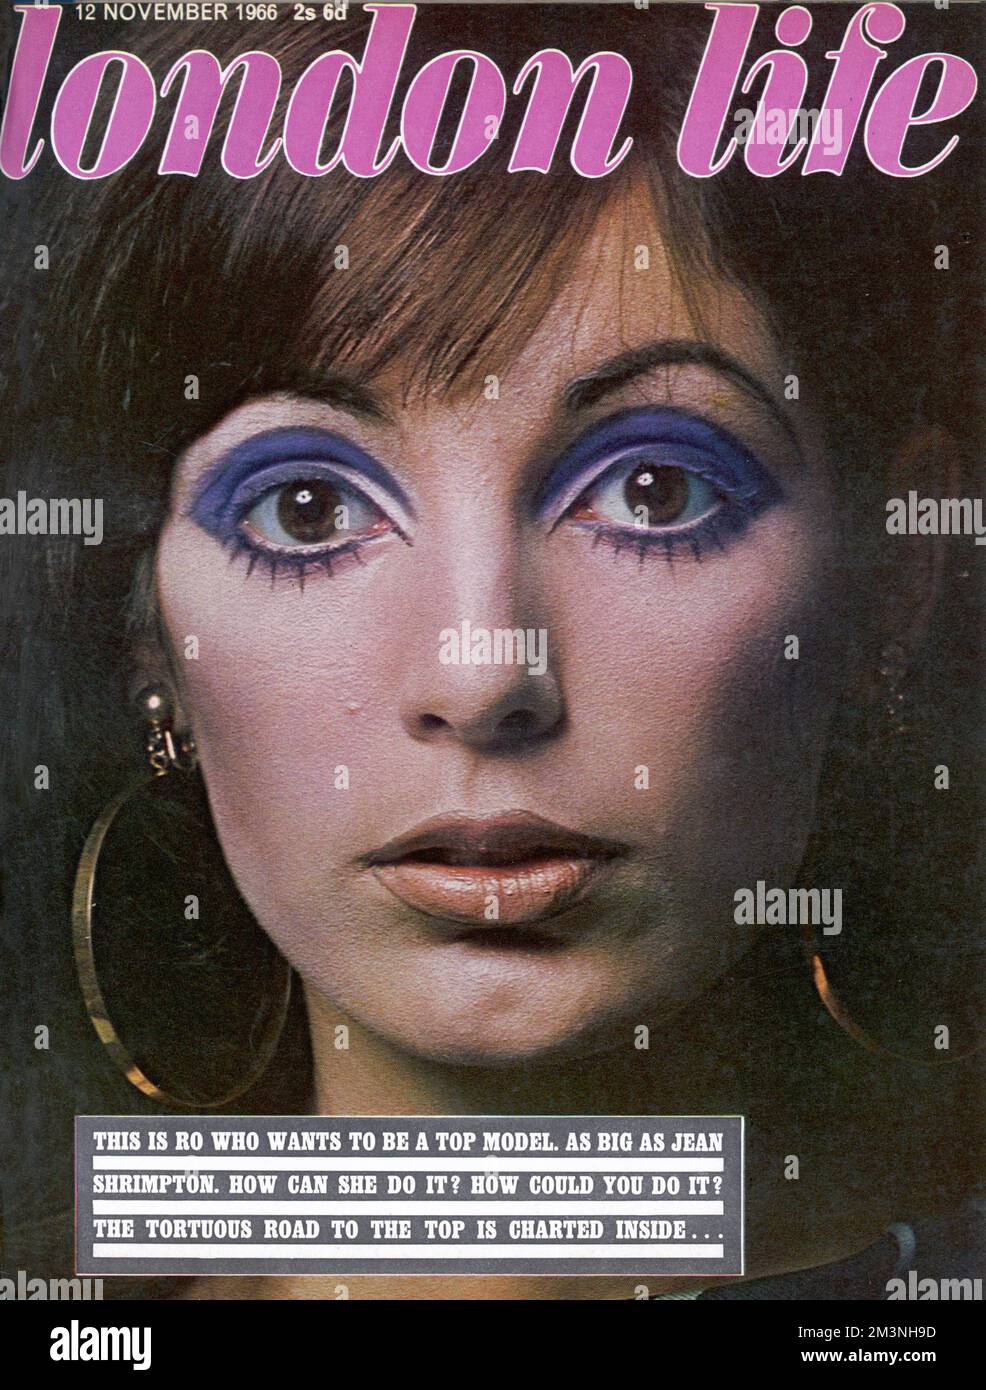 Front cover of the impossibly groovy London Life magazine which ran for just two years between 1965 and 1966 but chronicled the life and times of swinging sixties London.  Cover girl for this issue is up and coming model 'Ro' (surname Dominguez) who is pictured wearing huge hoop earrings and vivid purple eye shadow.     Date: 1966 Stock Photo